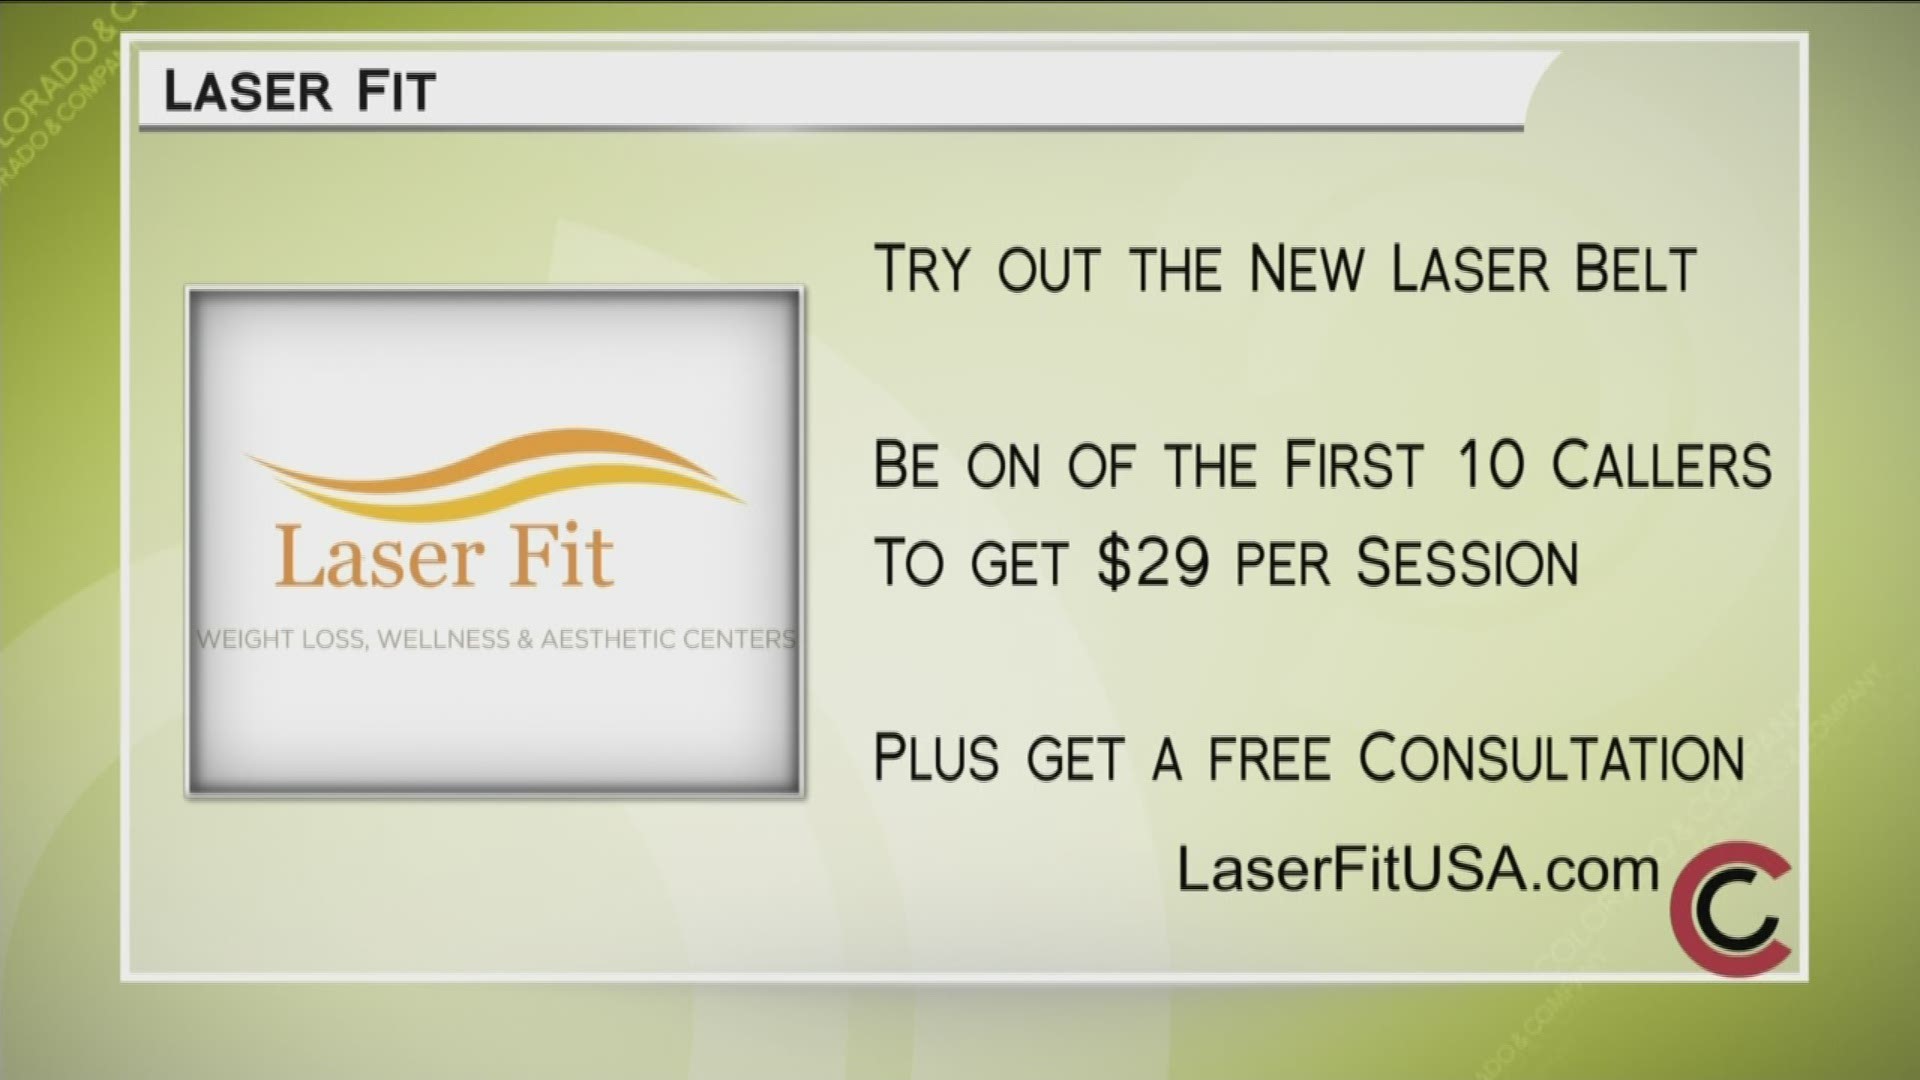 Call 303.847.1369 or visit LaserFitUSA.com to find out if Laser Fit is right for you.